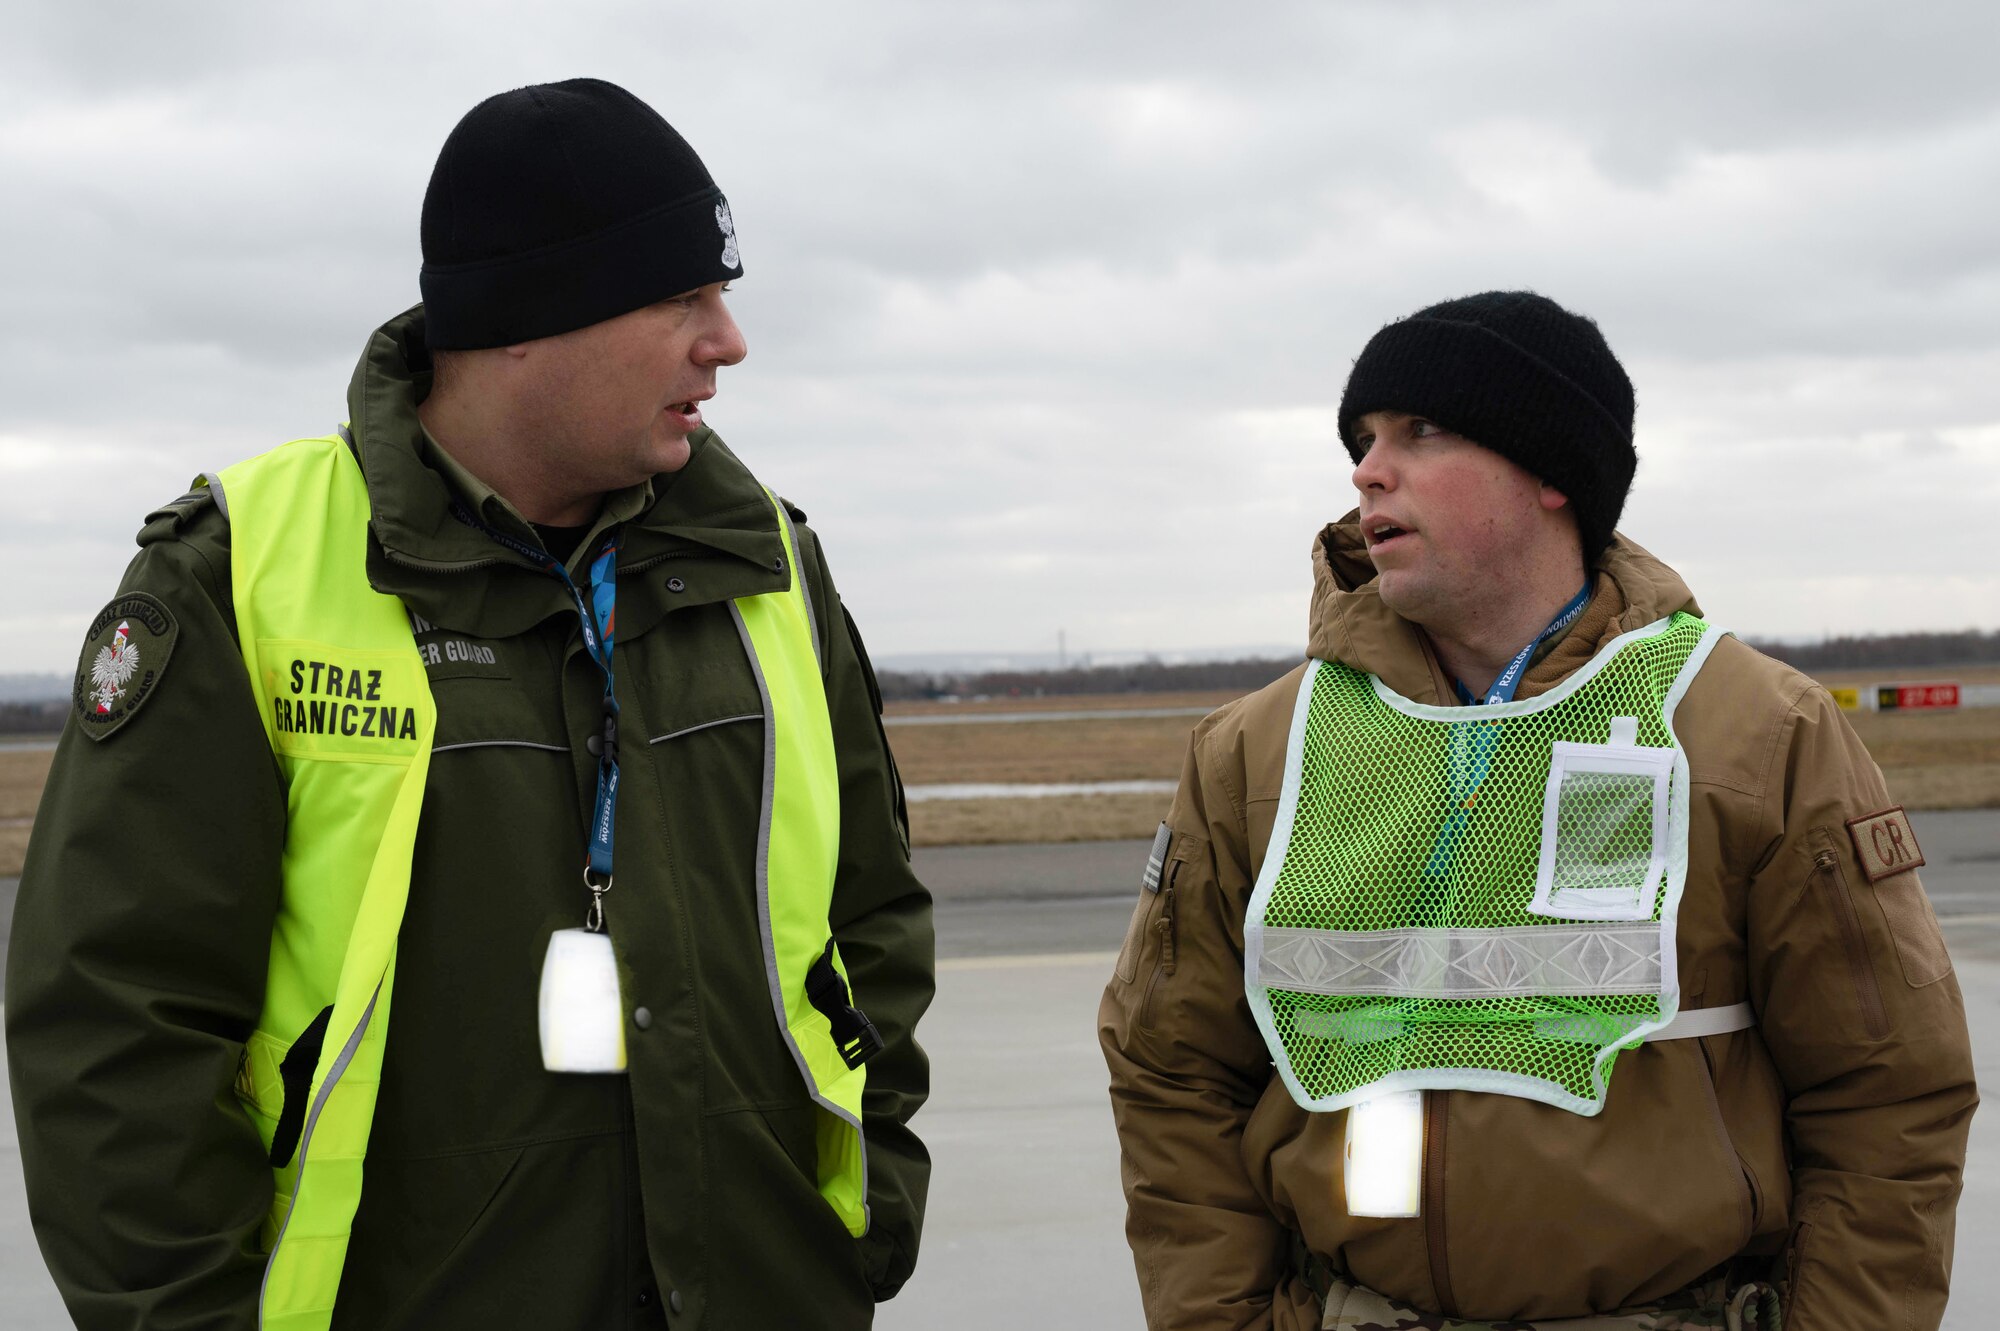 An Airman speaks with a member of Polish border control.